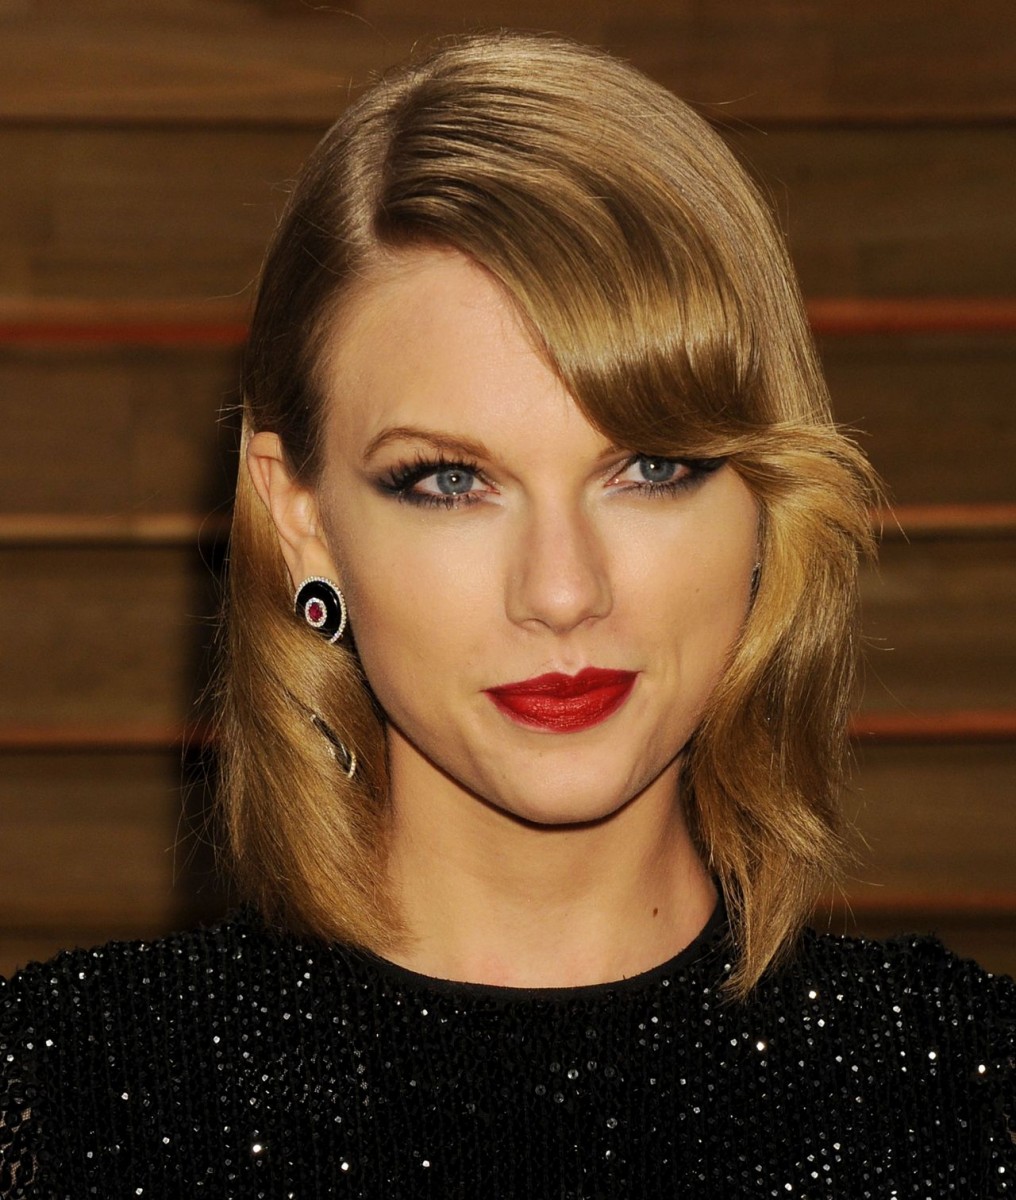 Taylor Swift photo 711 of 2551 pics, wallpaper - photo #677490 - ThePlace2